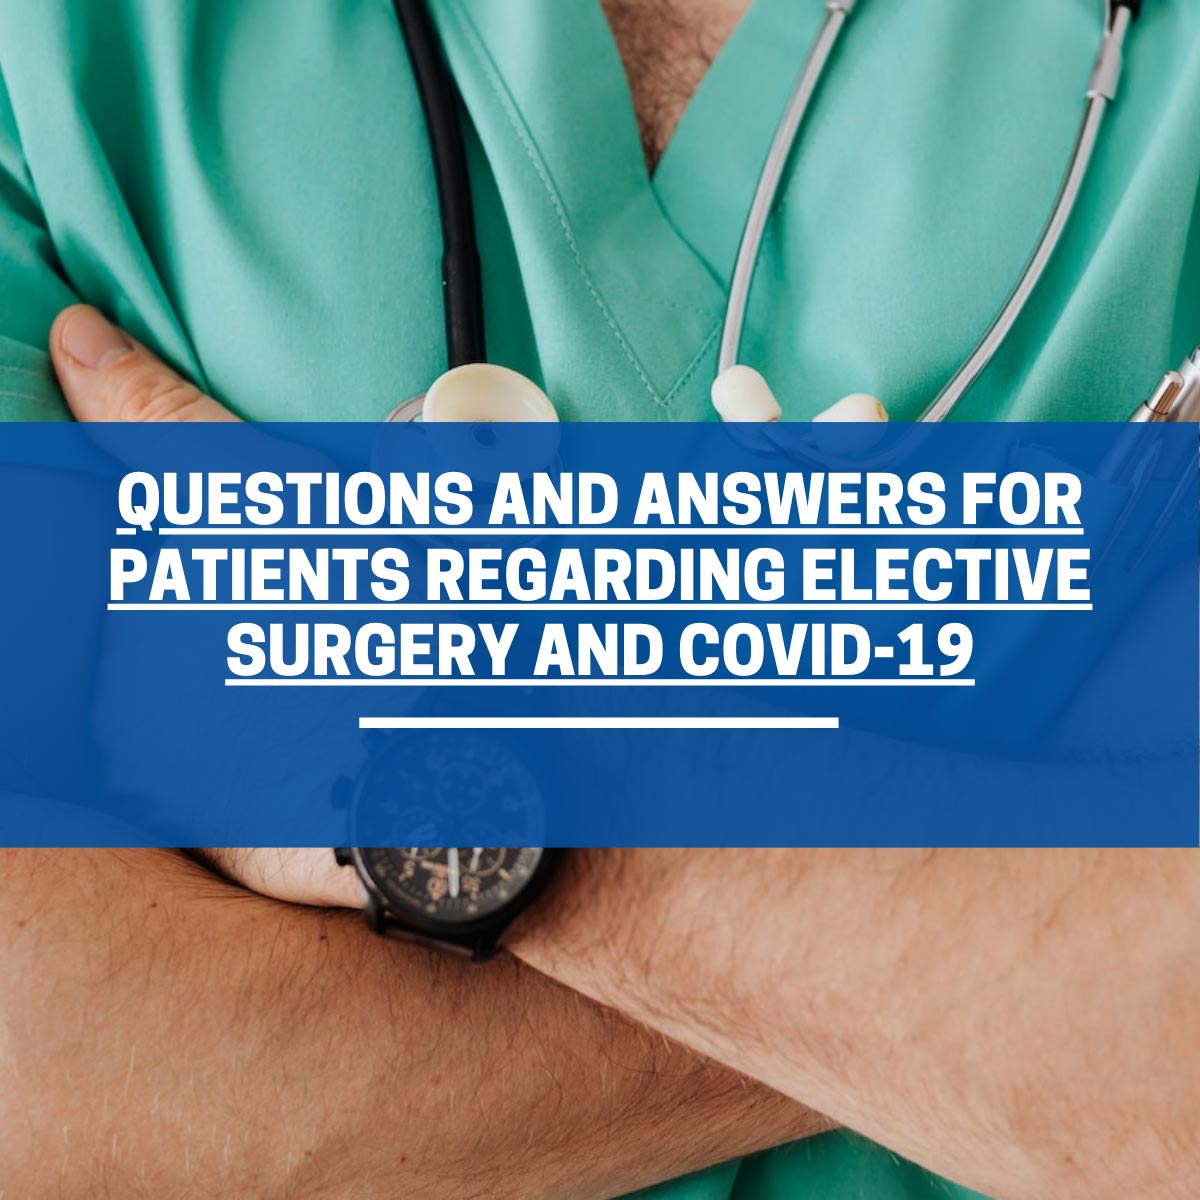 Questions and Answers for Patients Regarding Elective Surgery and COVID-19